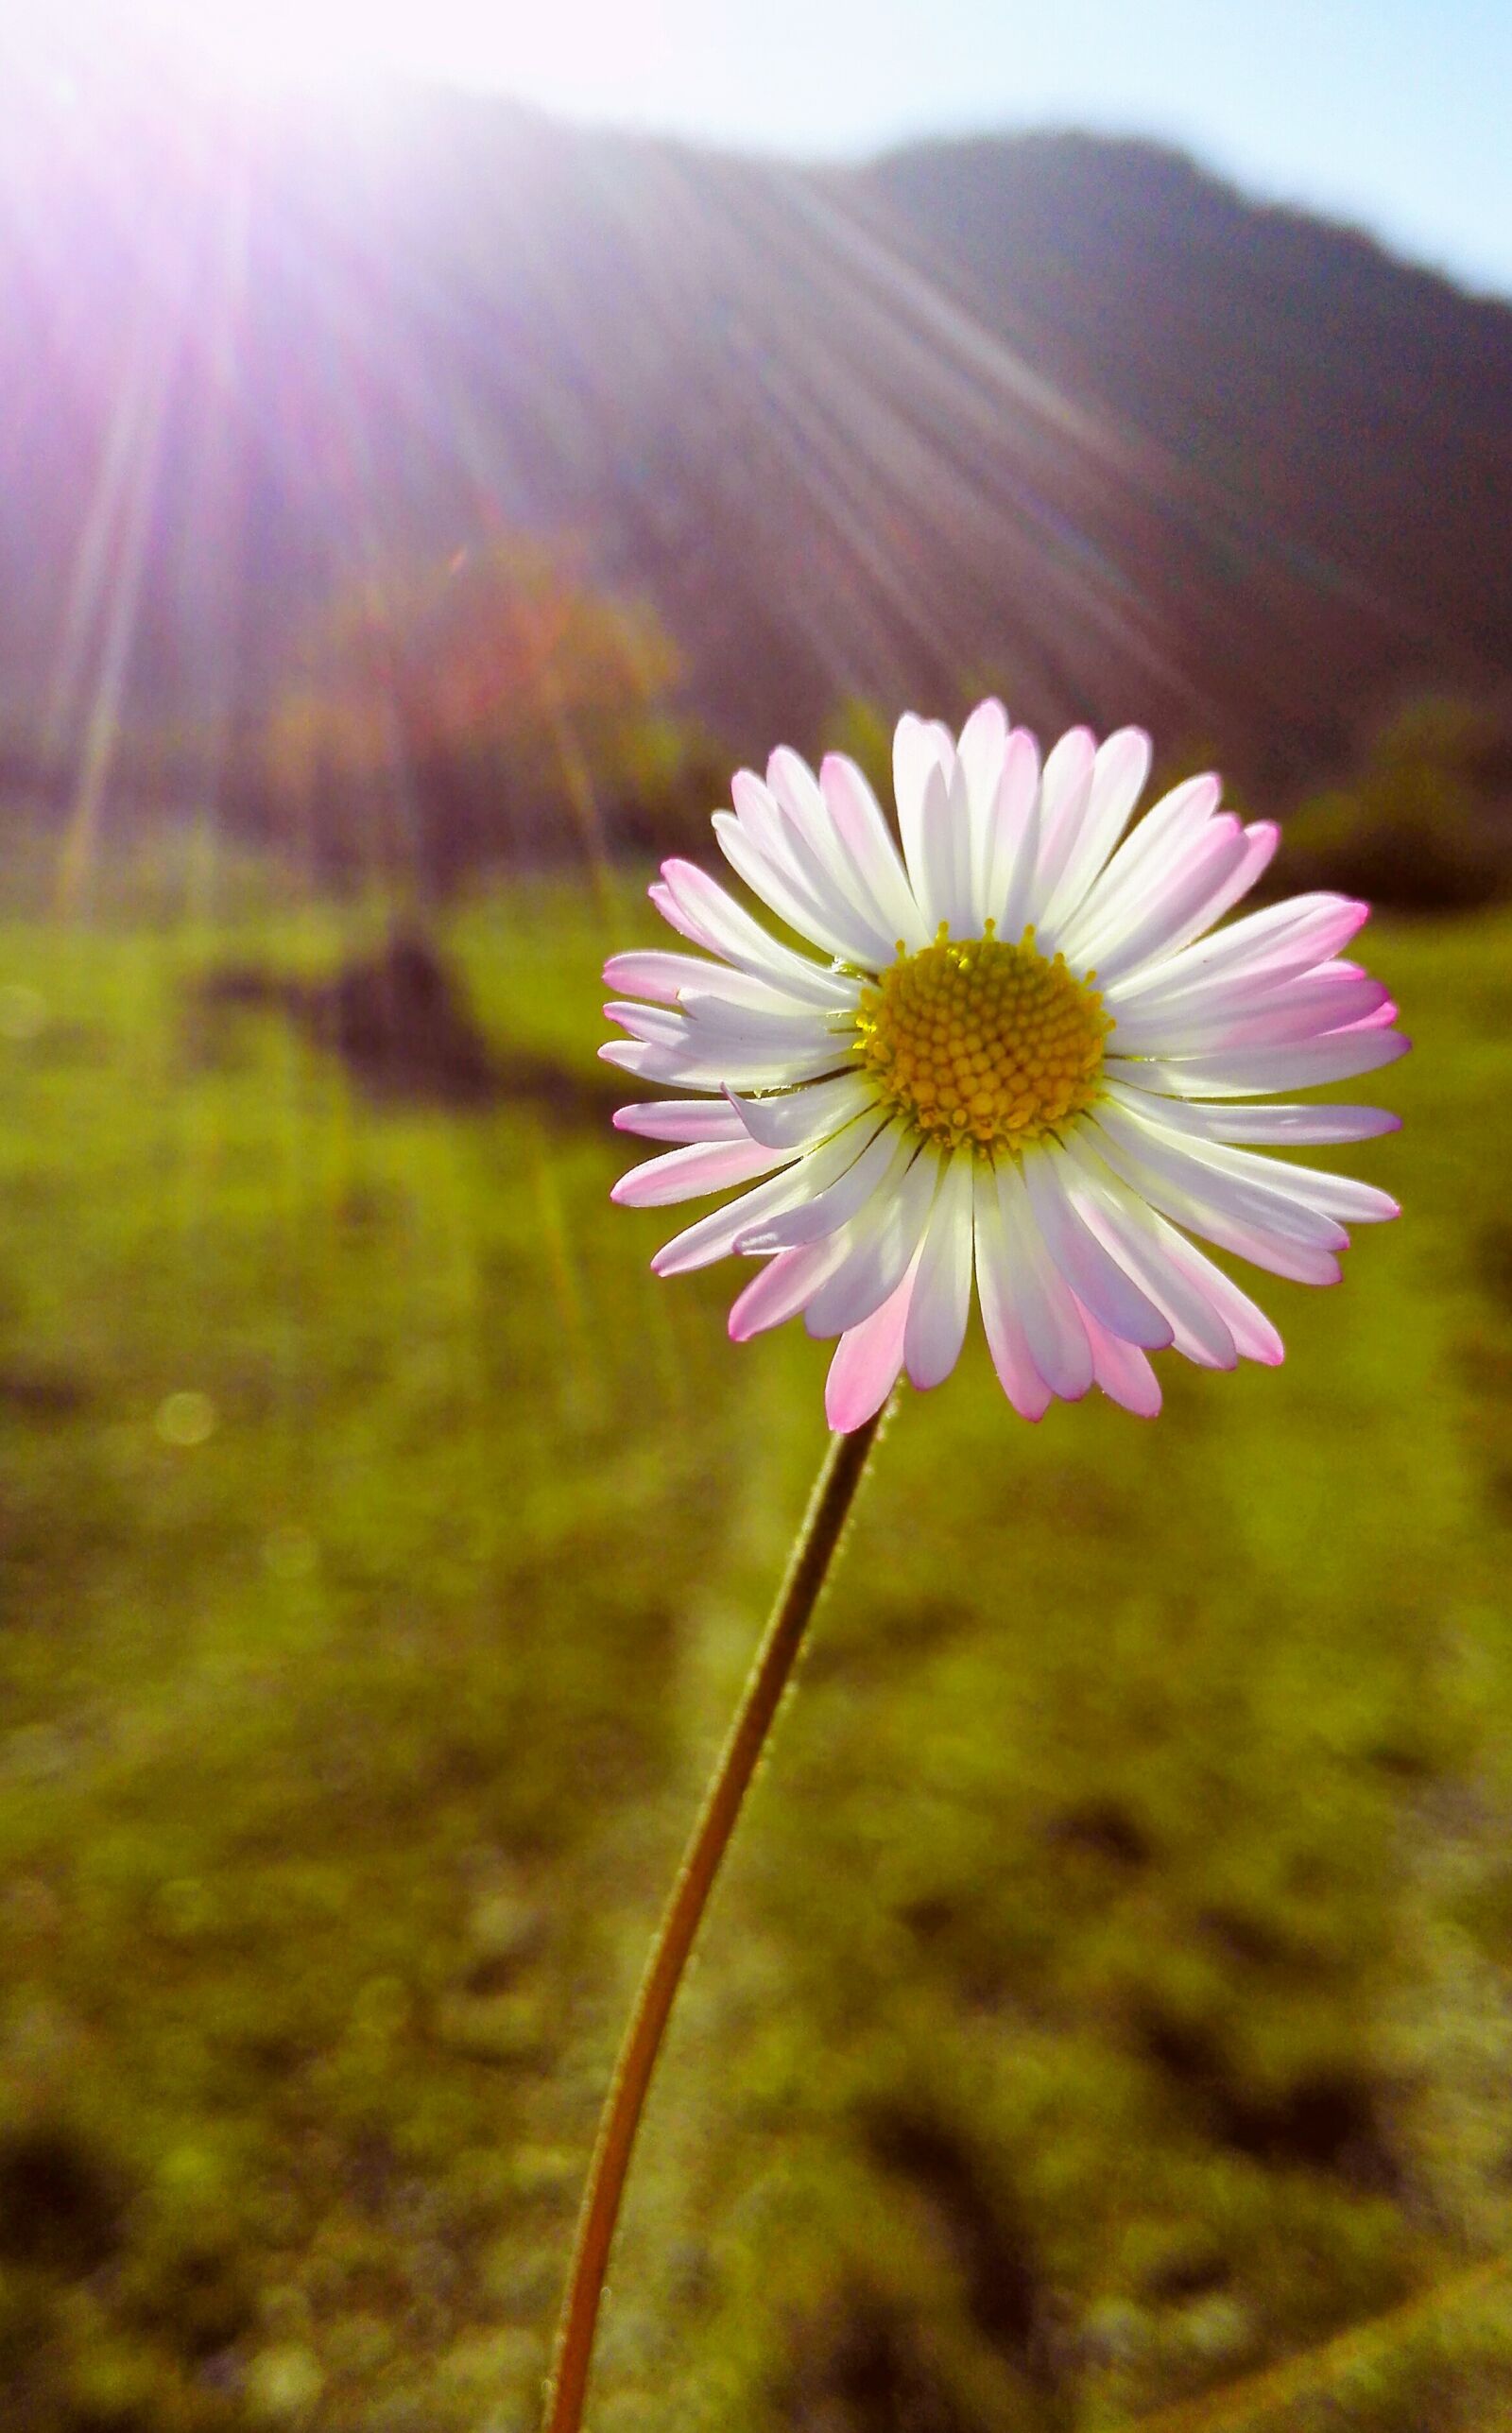 HUAWEI Mate 7 sample photo. Flower, daisy, plant photography